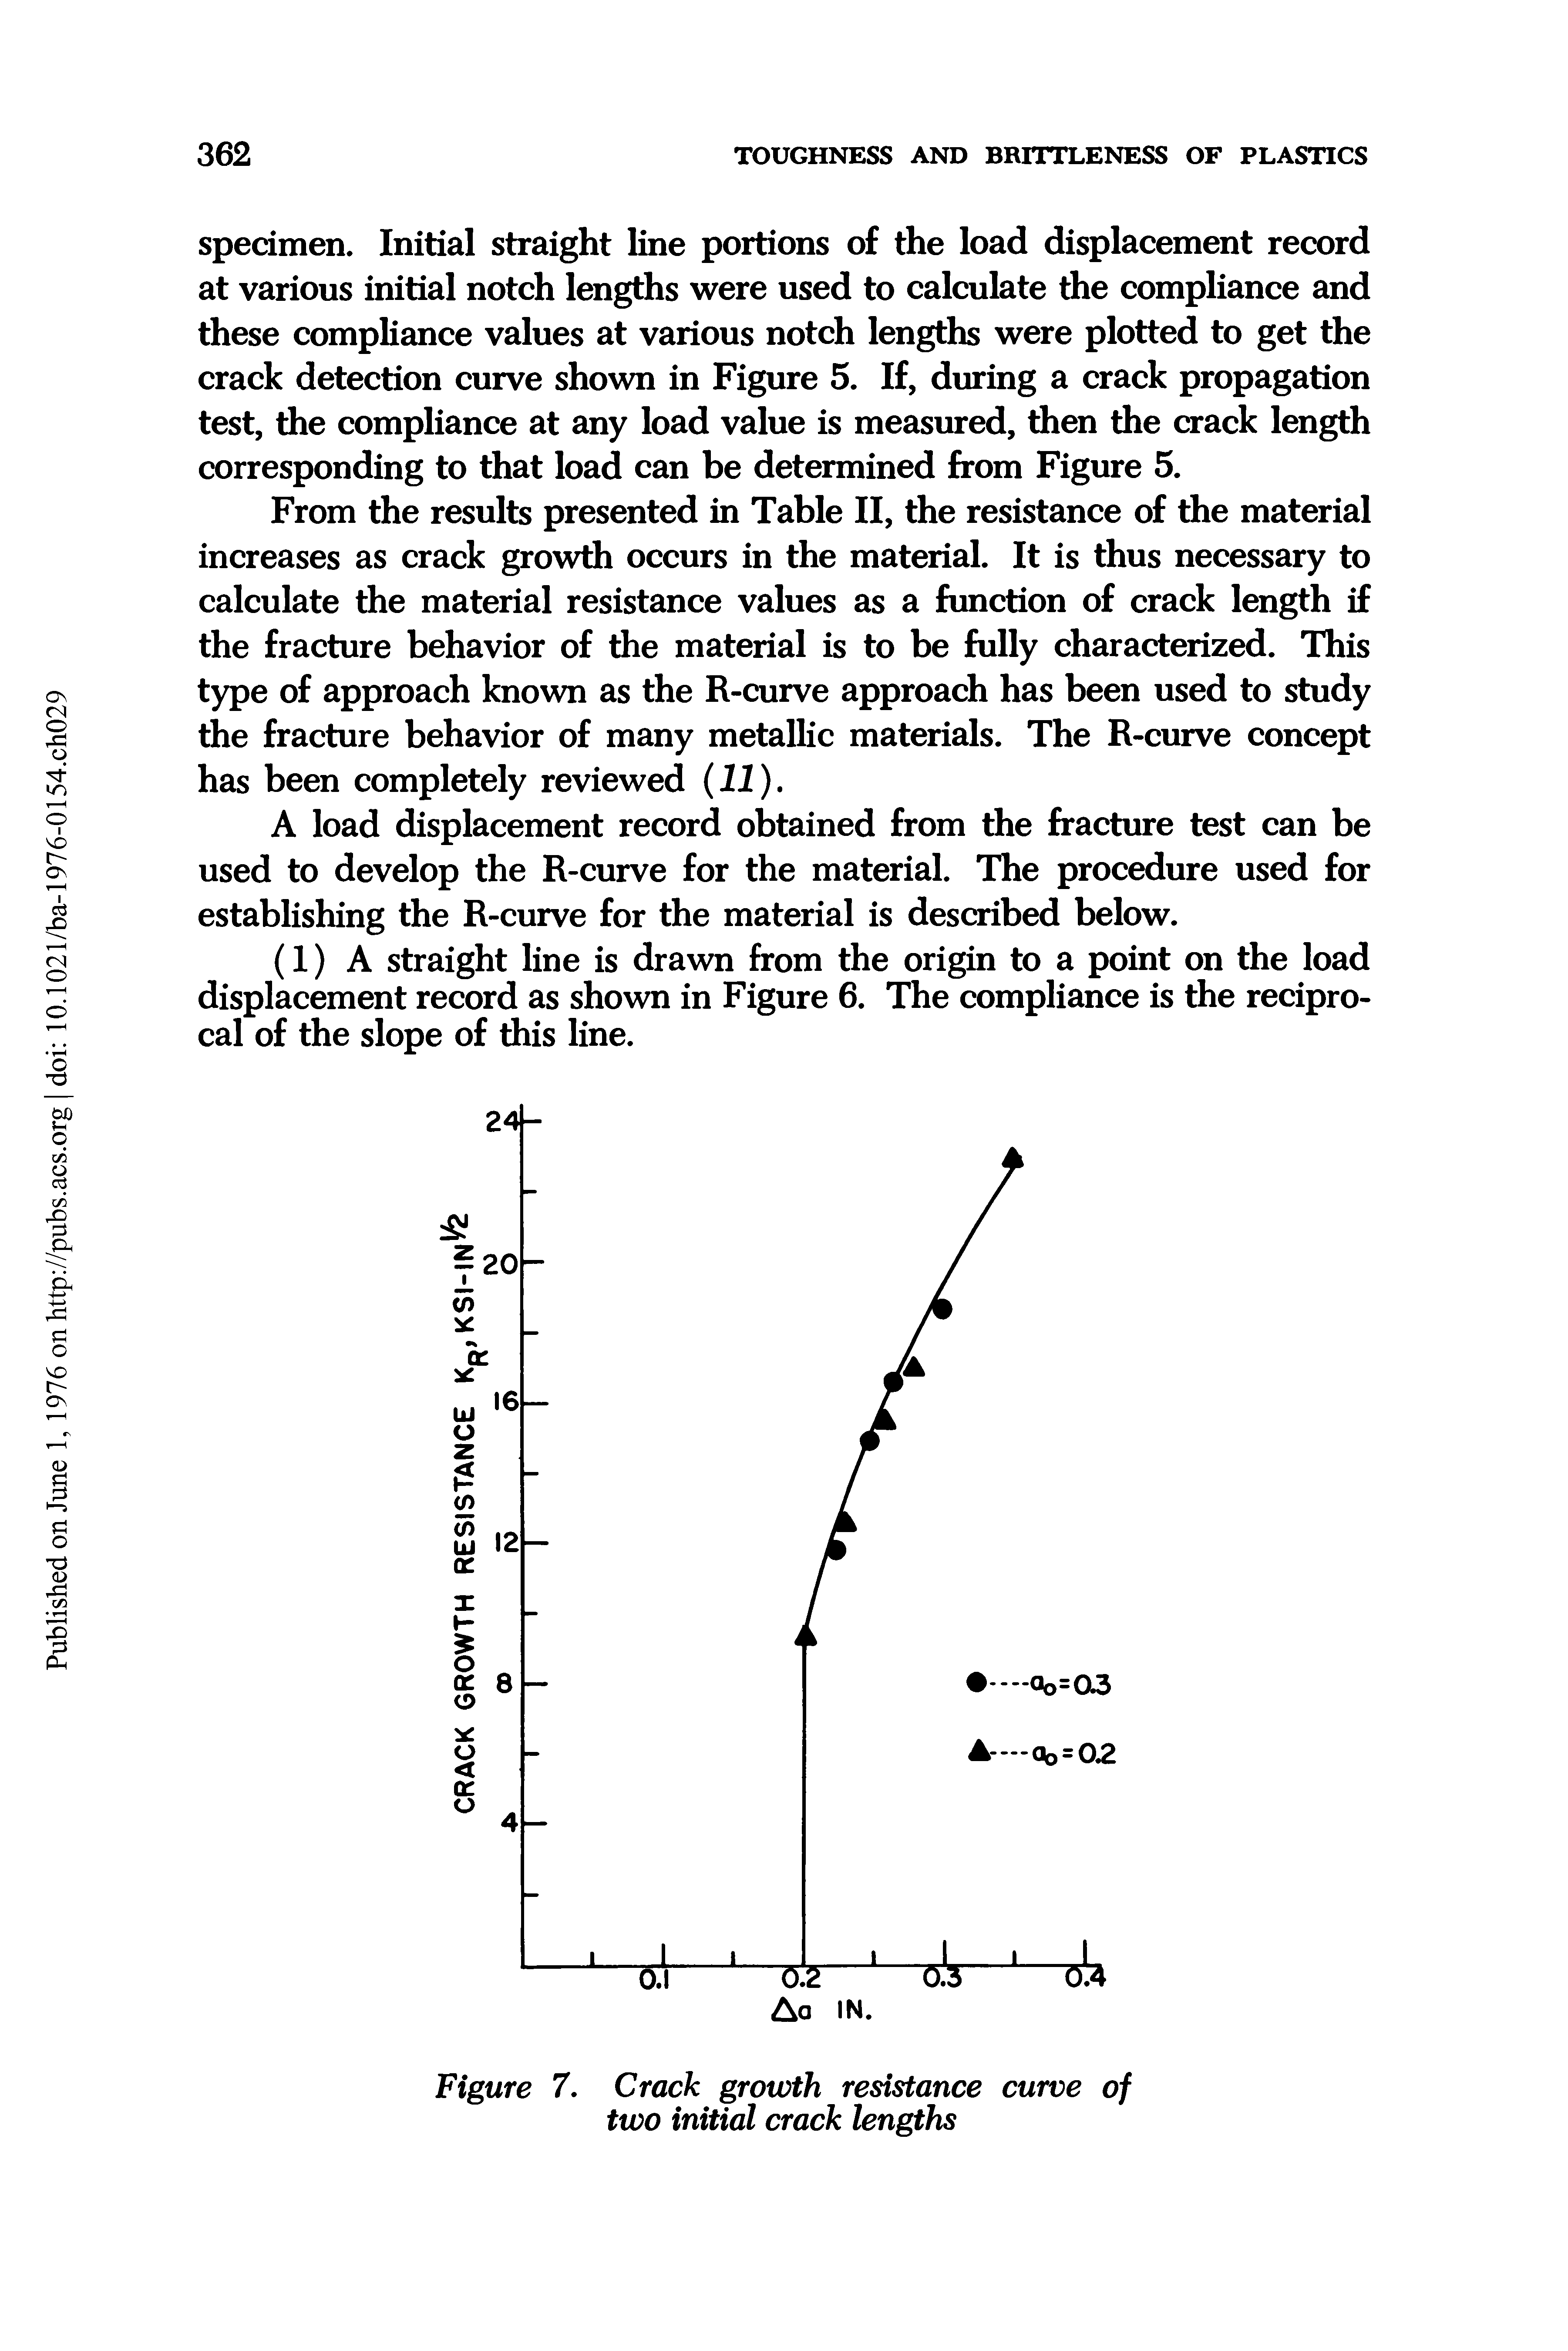 Figure 7. Crack growth resistance curve of two initial crack lengths...